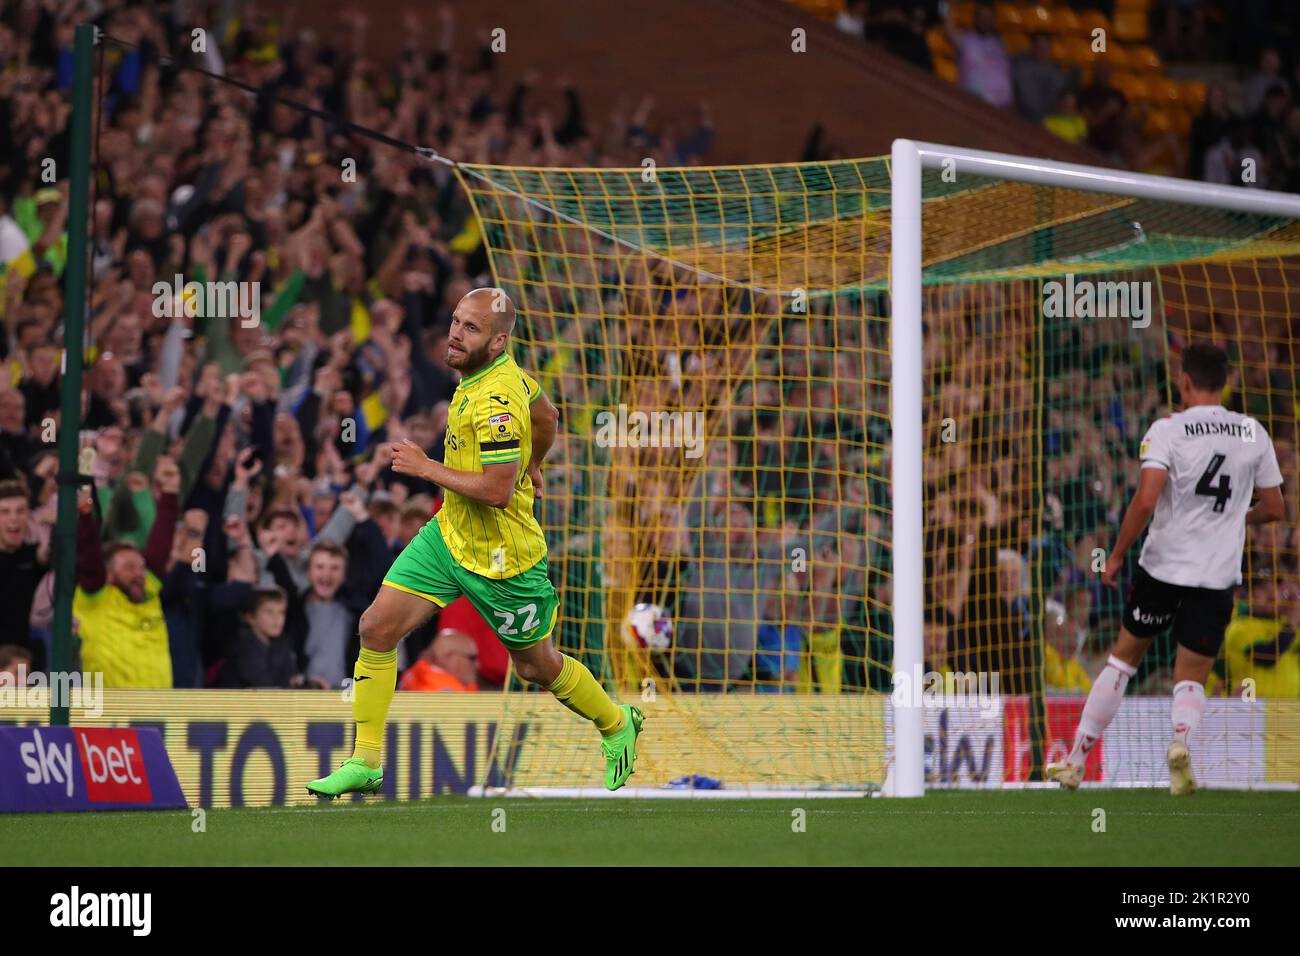 Teemu Pukki of Norwich City celebrates after scoring a goal to make it 1-0 - Norwich City v Bristol City, Sky Bet Championship, Carrow Road, Norwich, UK - 14th September 2022  Editorial Use Only - DataCo restrictions apply Stock Photo